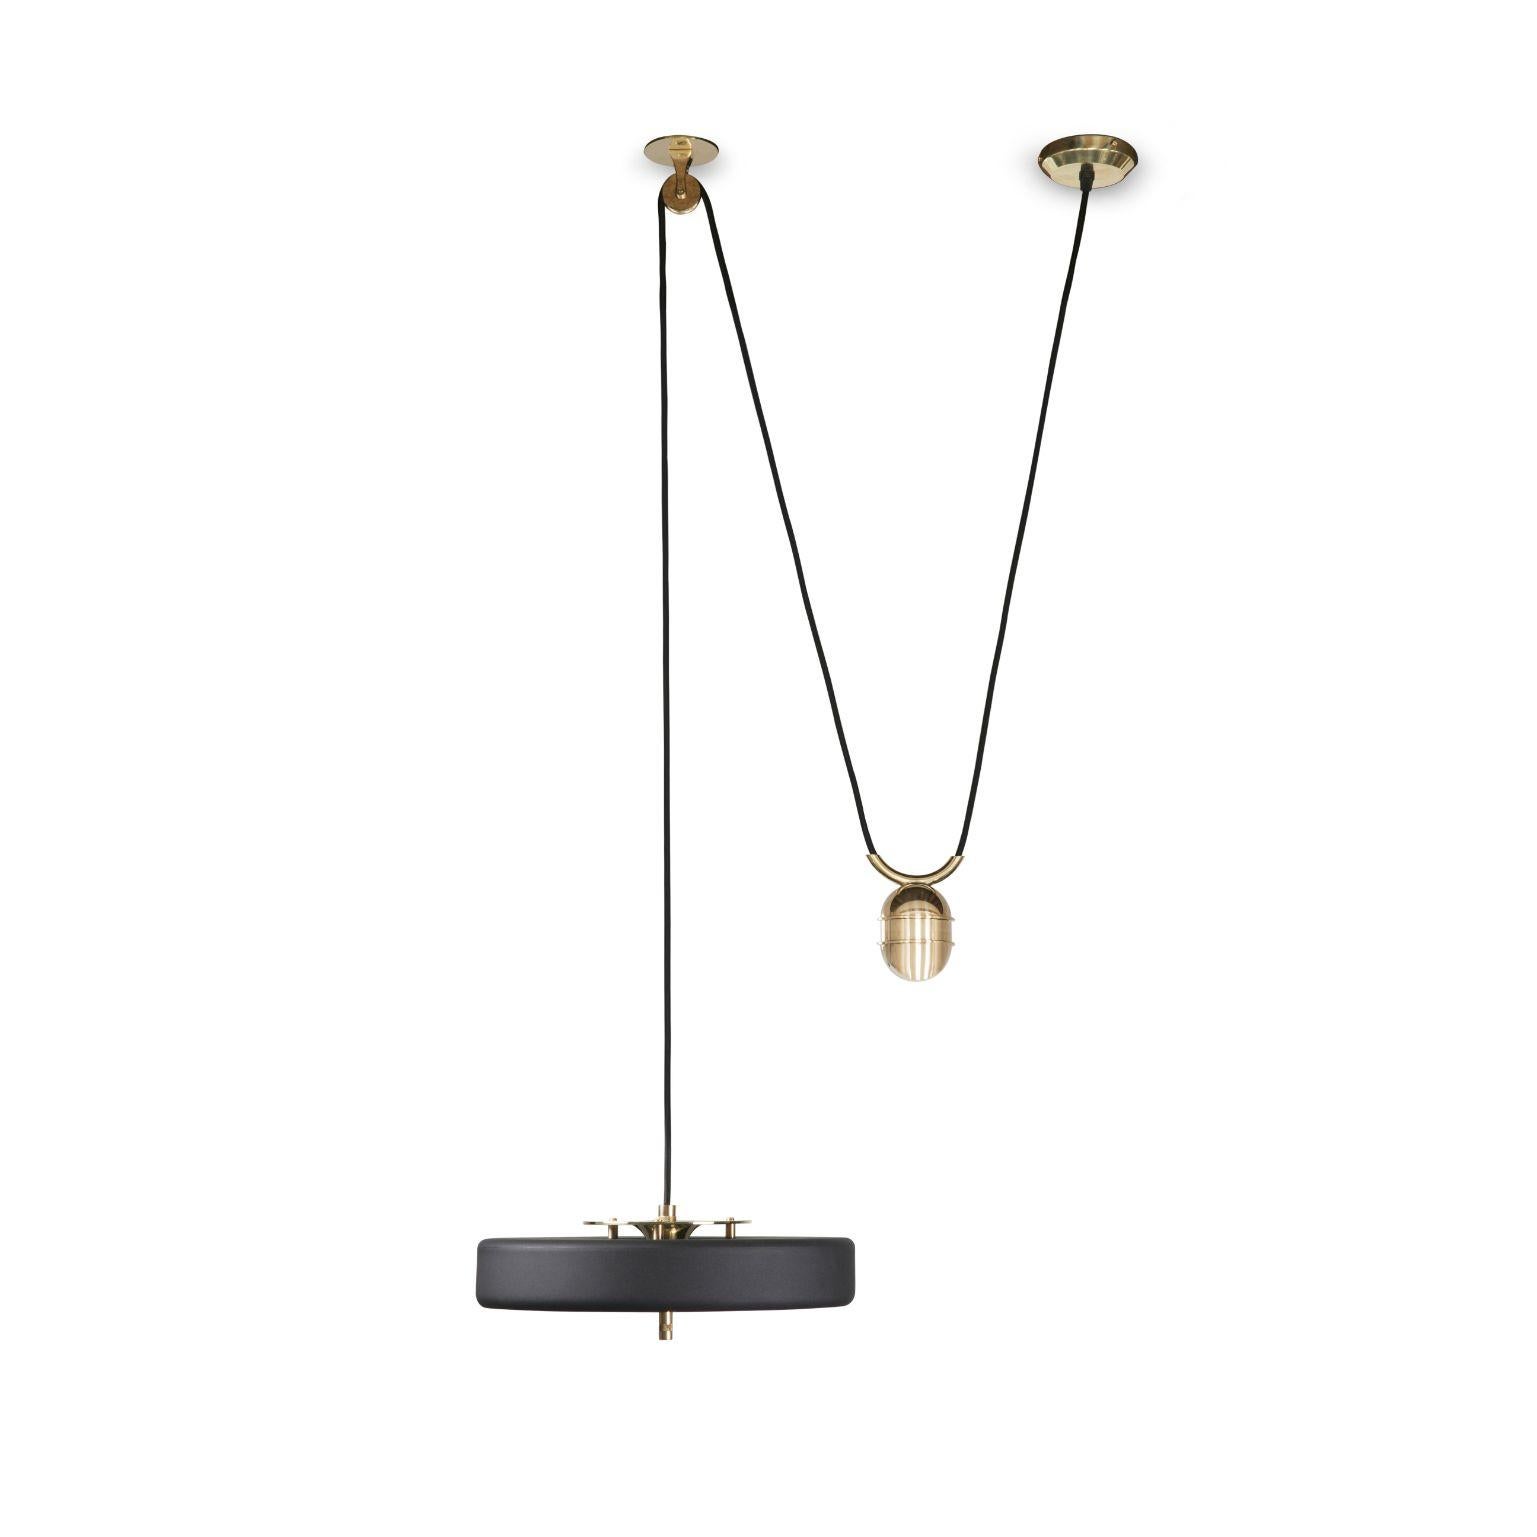 Revolve rise and fall pendant light - polished brass - black by Bert Frank
Dimensions: 30 x 35 x 11 cm, small lamp: 7.6 cm
Materials: Brass, steel

Also available: brushed brass
When Adam Yeats and Robbie Llewellyn founded Bert Frank in 2013 it was